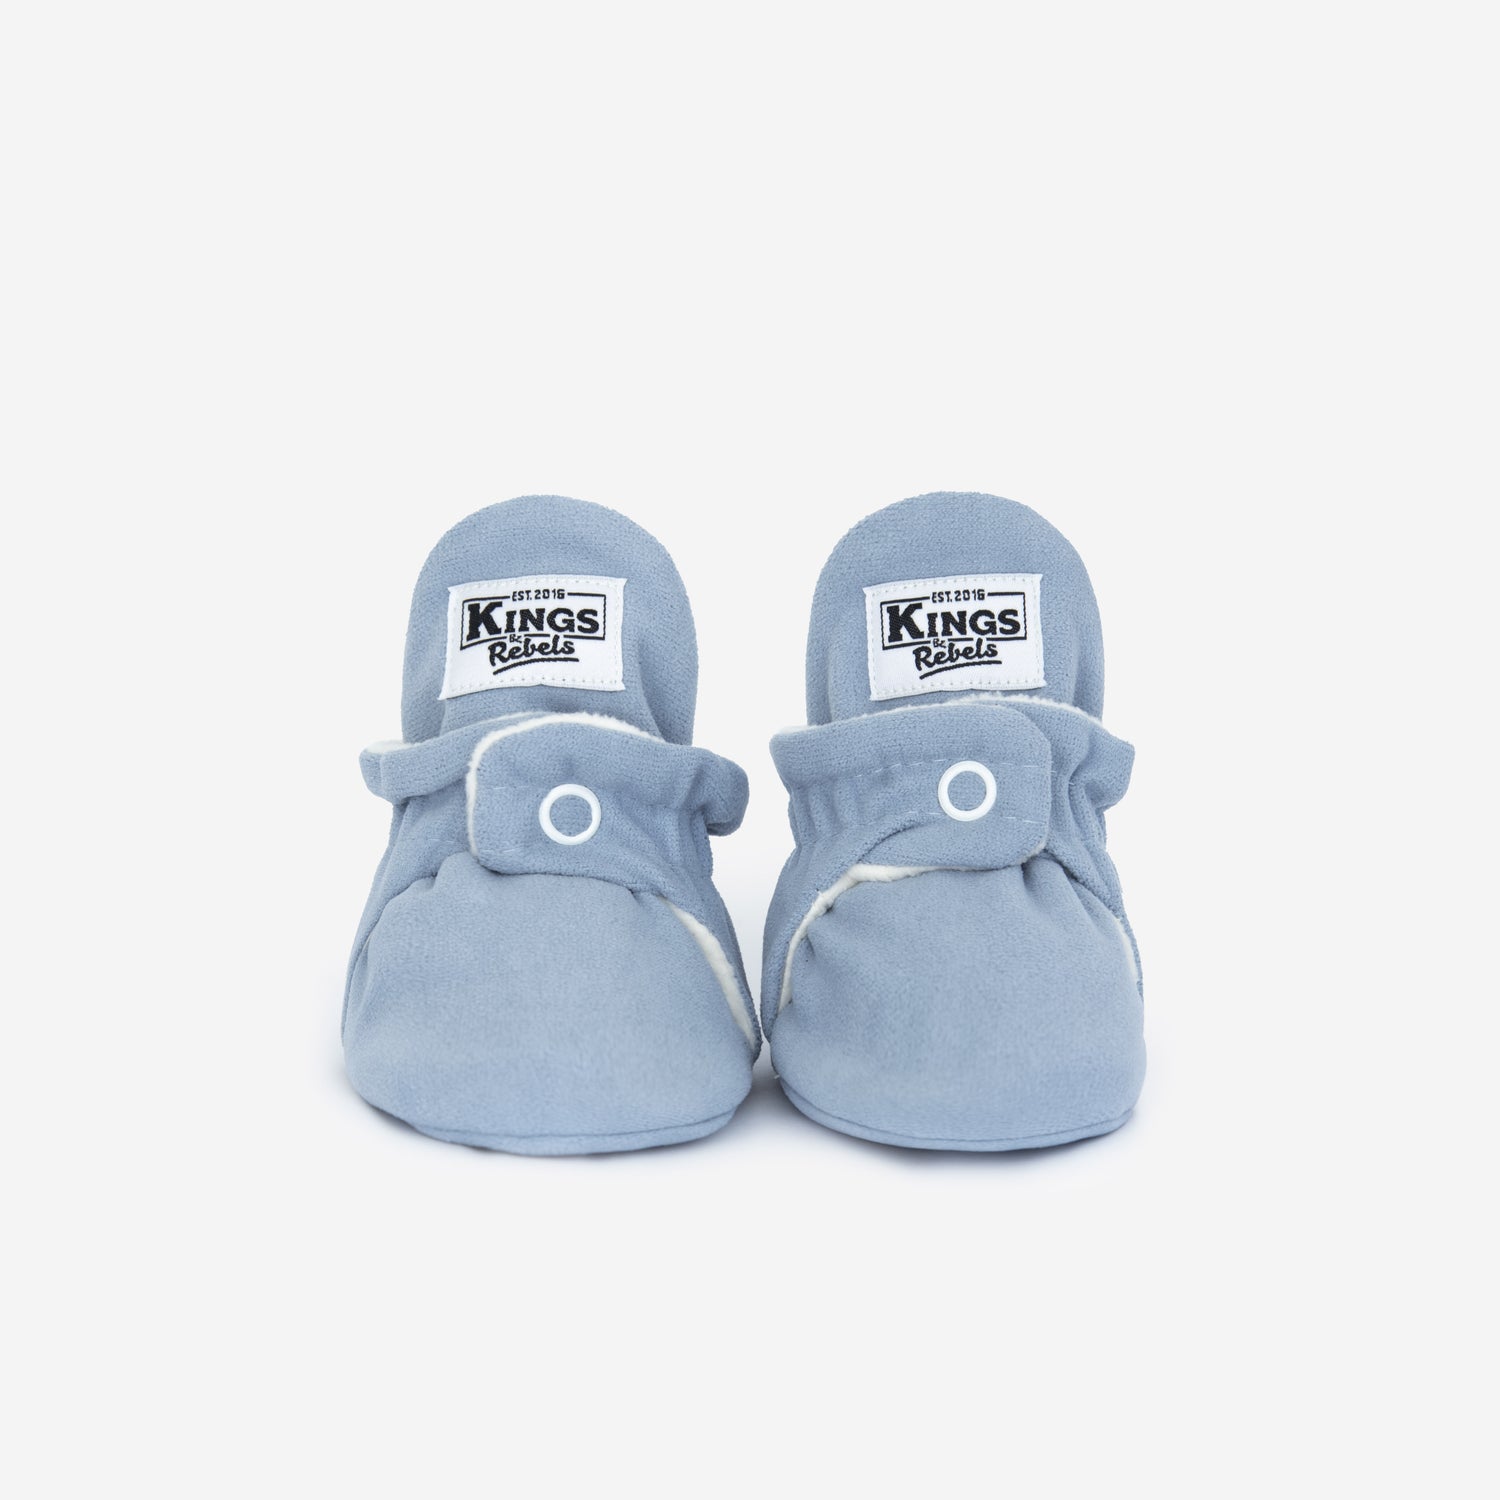 Sonderedition Gamuza Booties 'Classic'- Sea Blue - The Little One • Family.Concept.Store. 